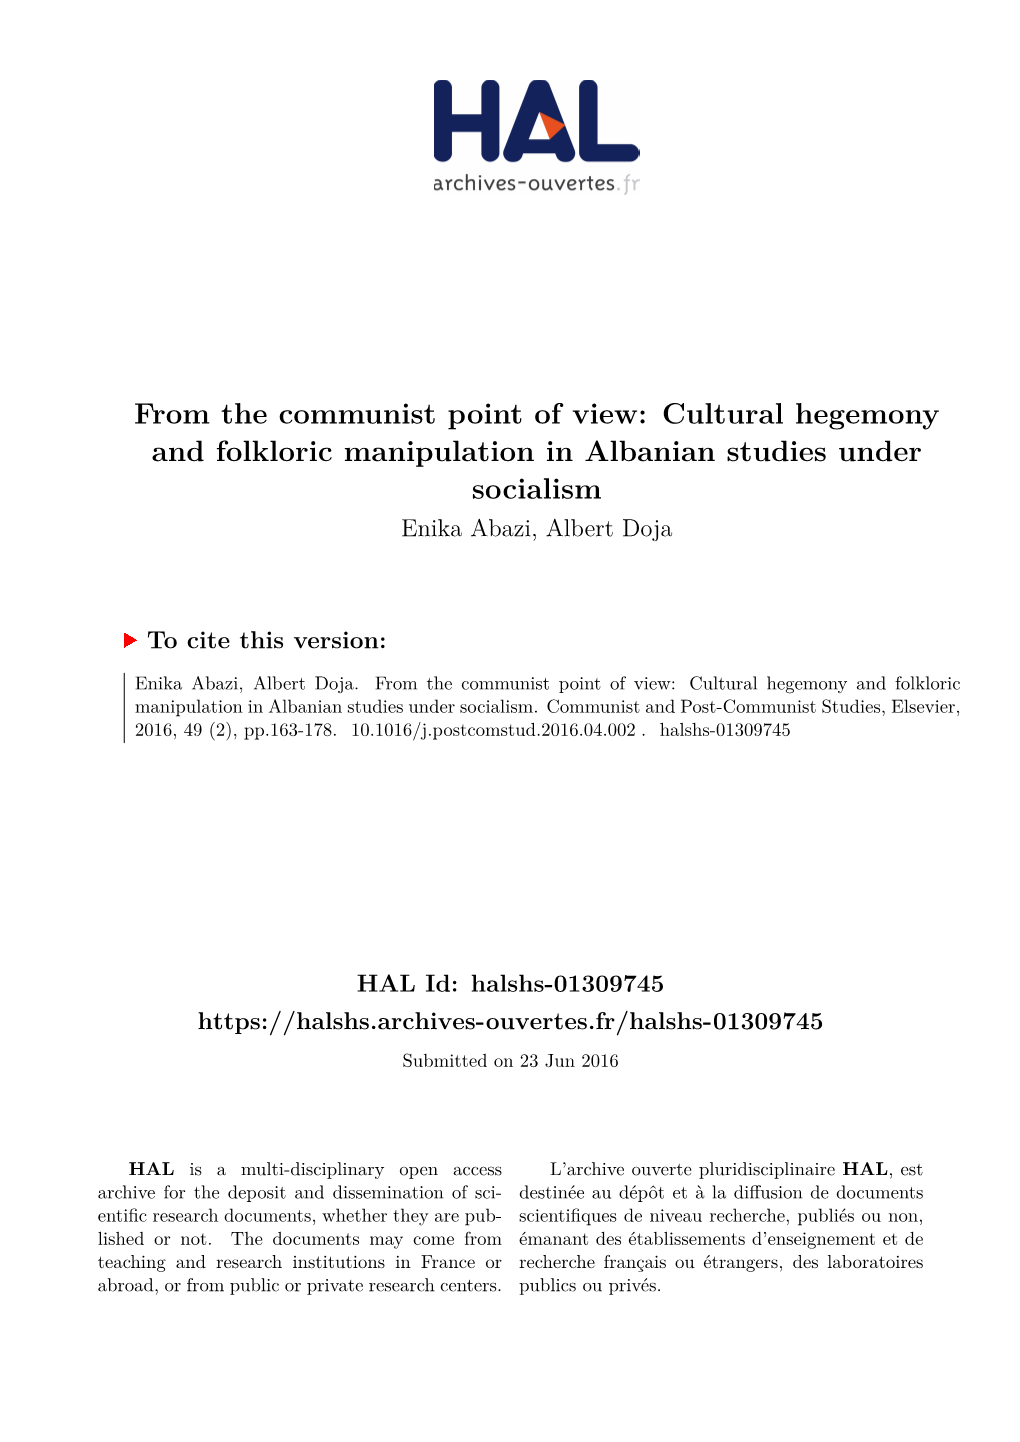 From the Communist Point of View: Cultural Hegemony and Folkloric Manipulation in Albanian Studies Under Socialism Enika Abazi, Albert Doja